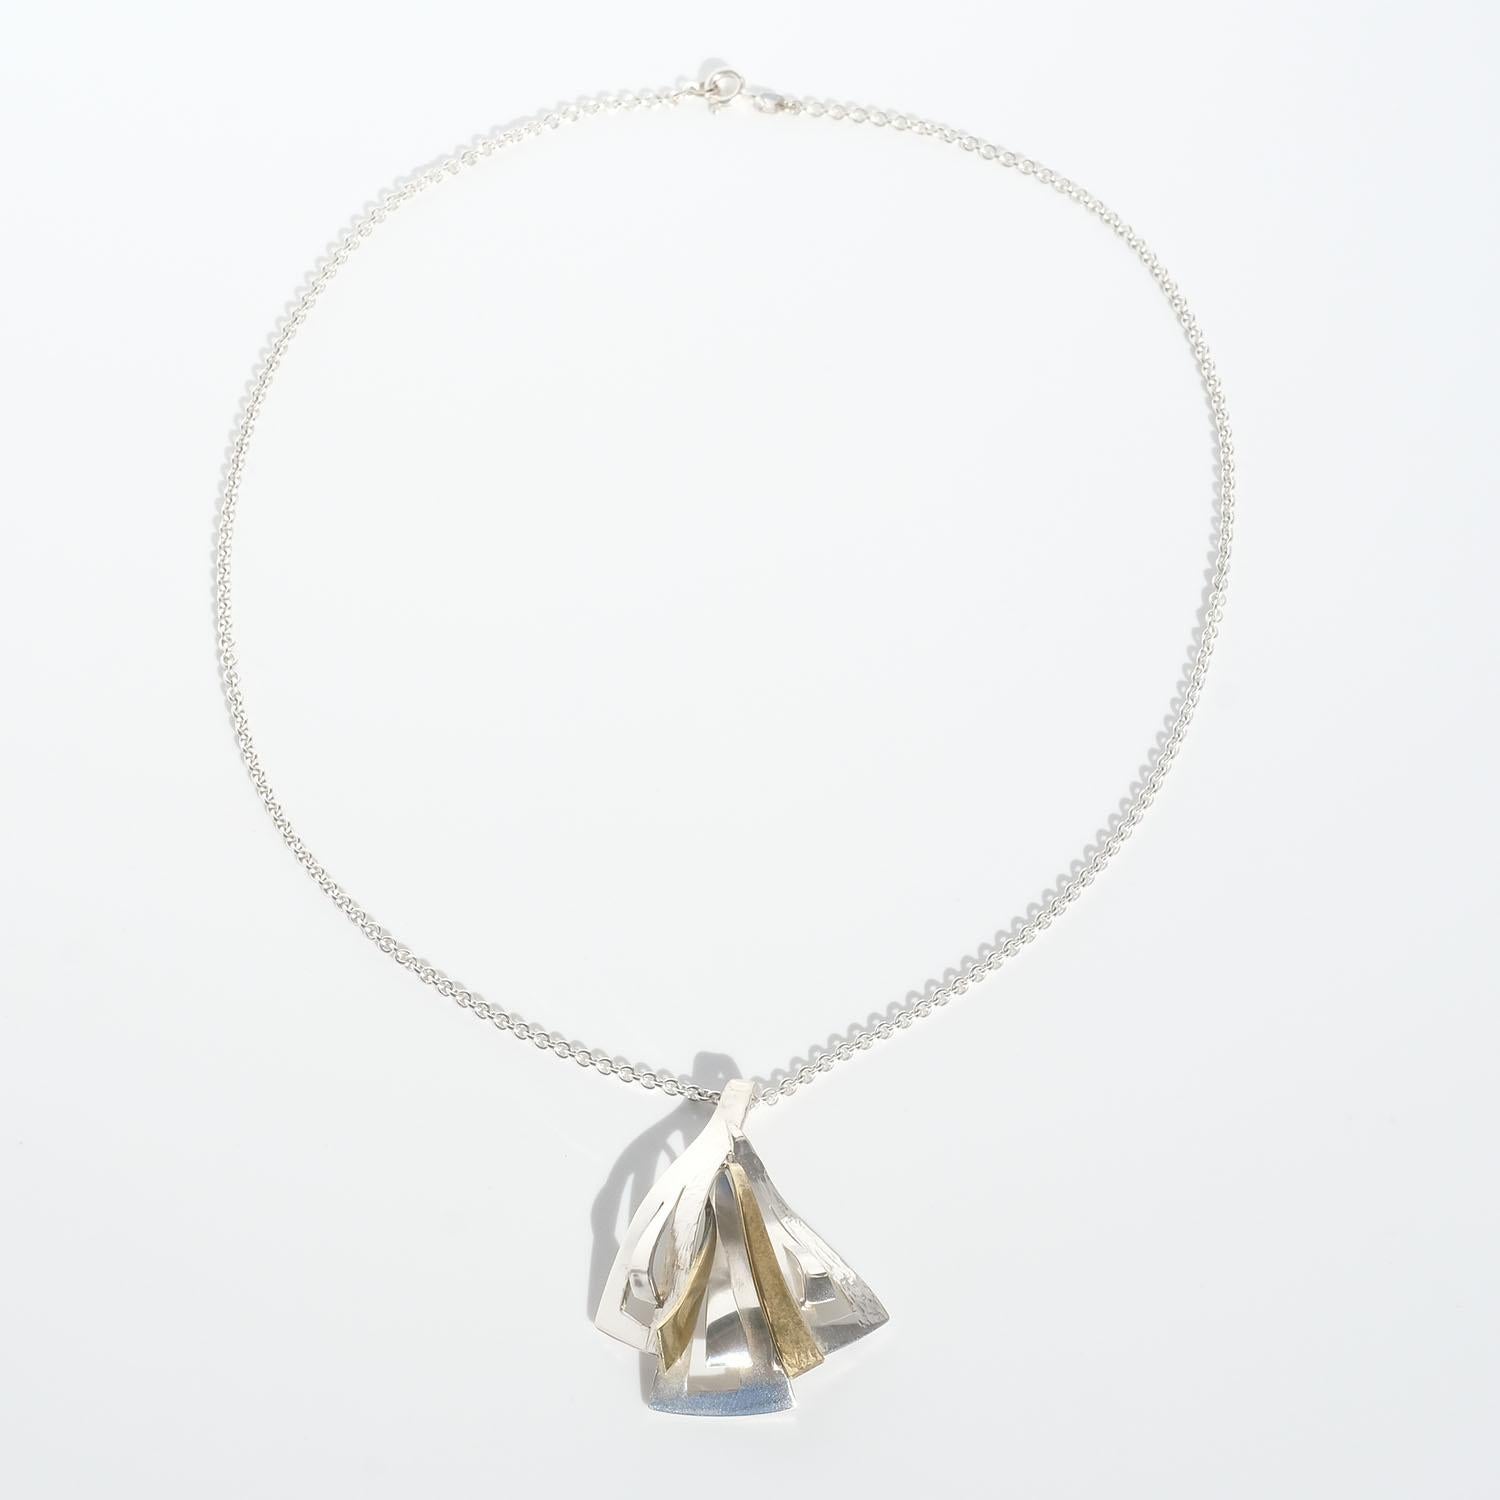 This sterling silver pendant has an undulating shape. It has both a shiny and a patterned suface, and in the center it is partly gilded. With the pendant comes a 46,5 cm long silver cable chain.

The pendant is perfect for the everyday wardrobe and